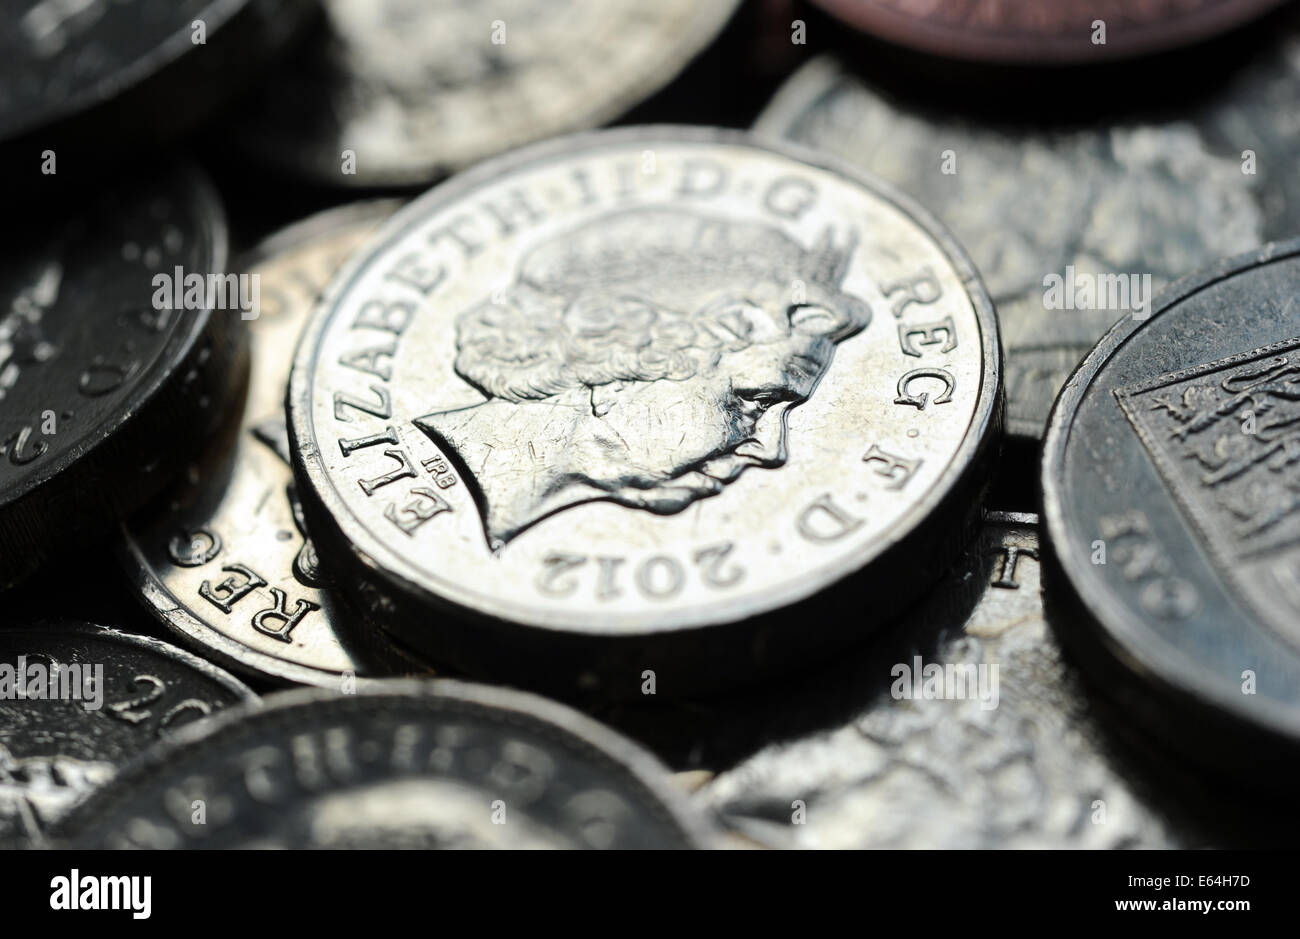 A PILE OF ONE POUND COINS RE PENSIONS PENSIONERS INCOMES INTEREST RATES SAVINGS RETIREMENT MORTGAGES BANKS CASH MONEY UK Stock Photo